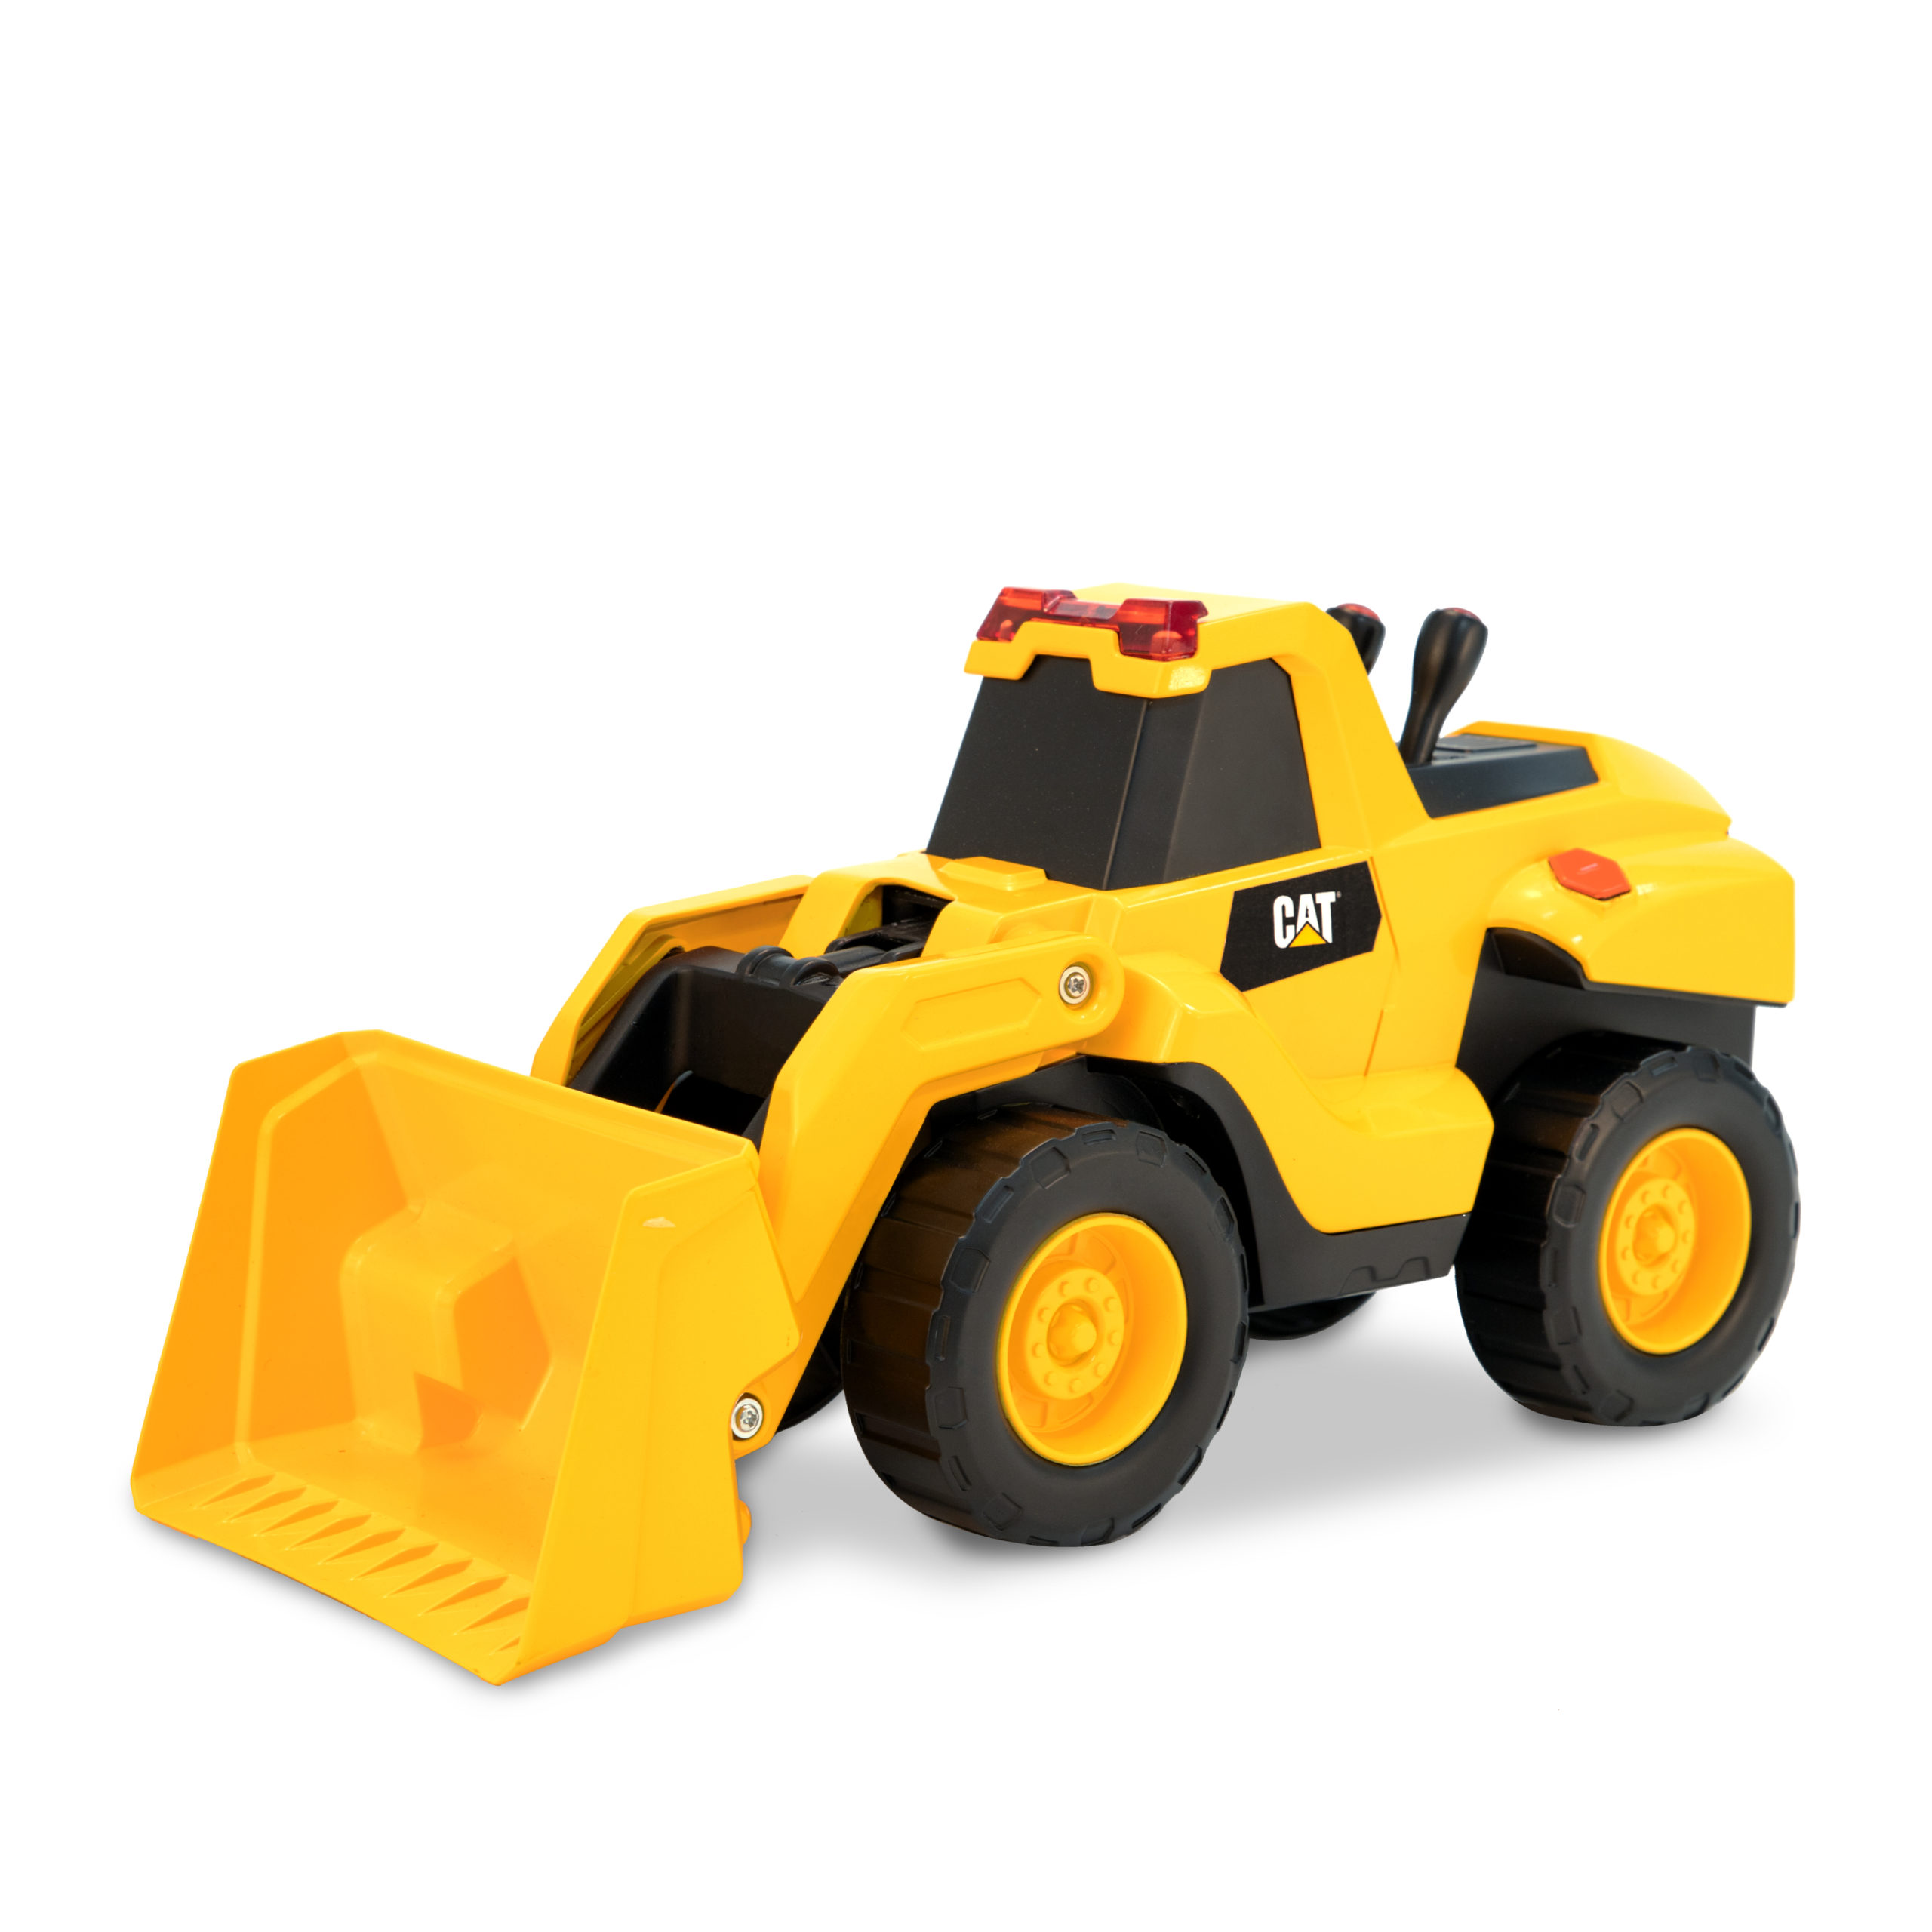 Caterpillar CAT Construction Tough Machines Toy Wheel Loader with Lights & Sounds 